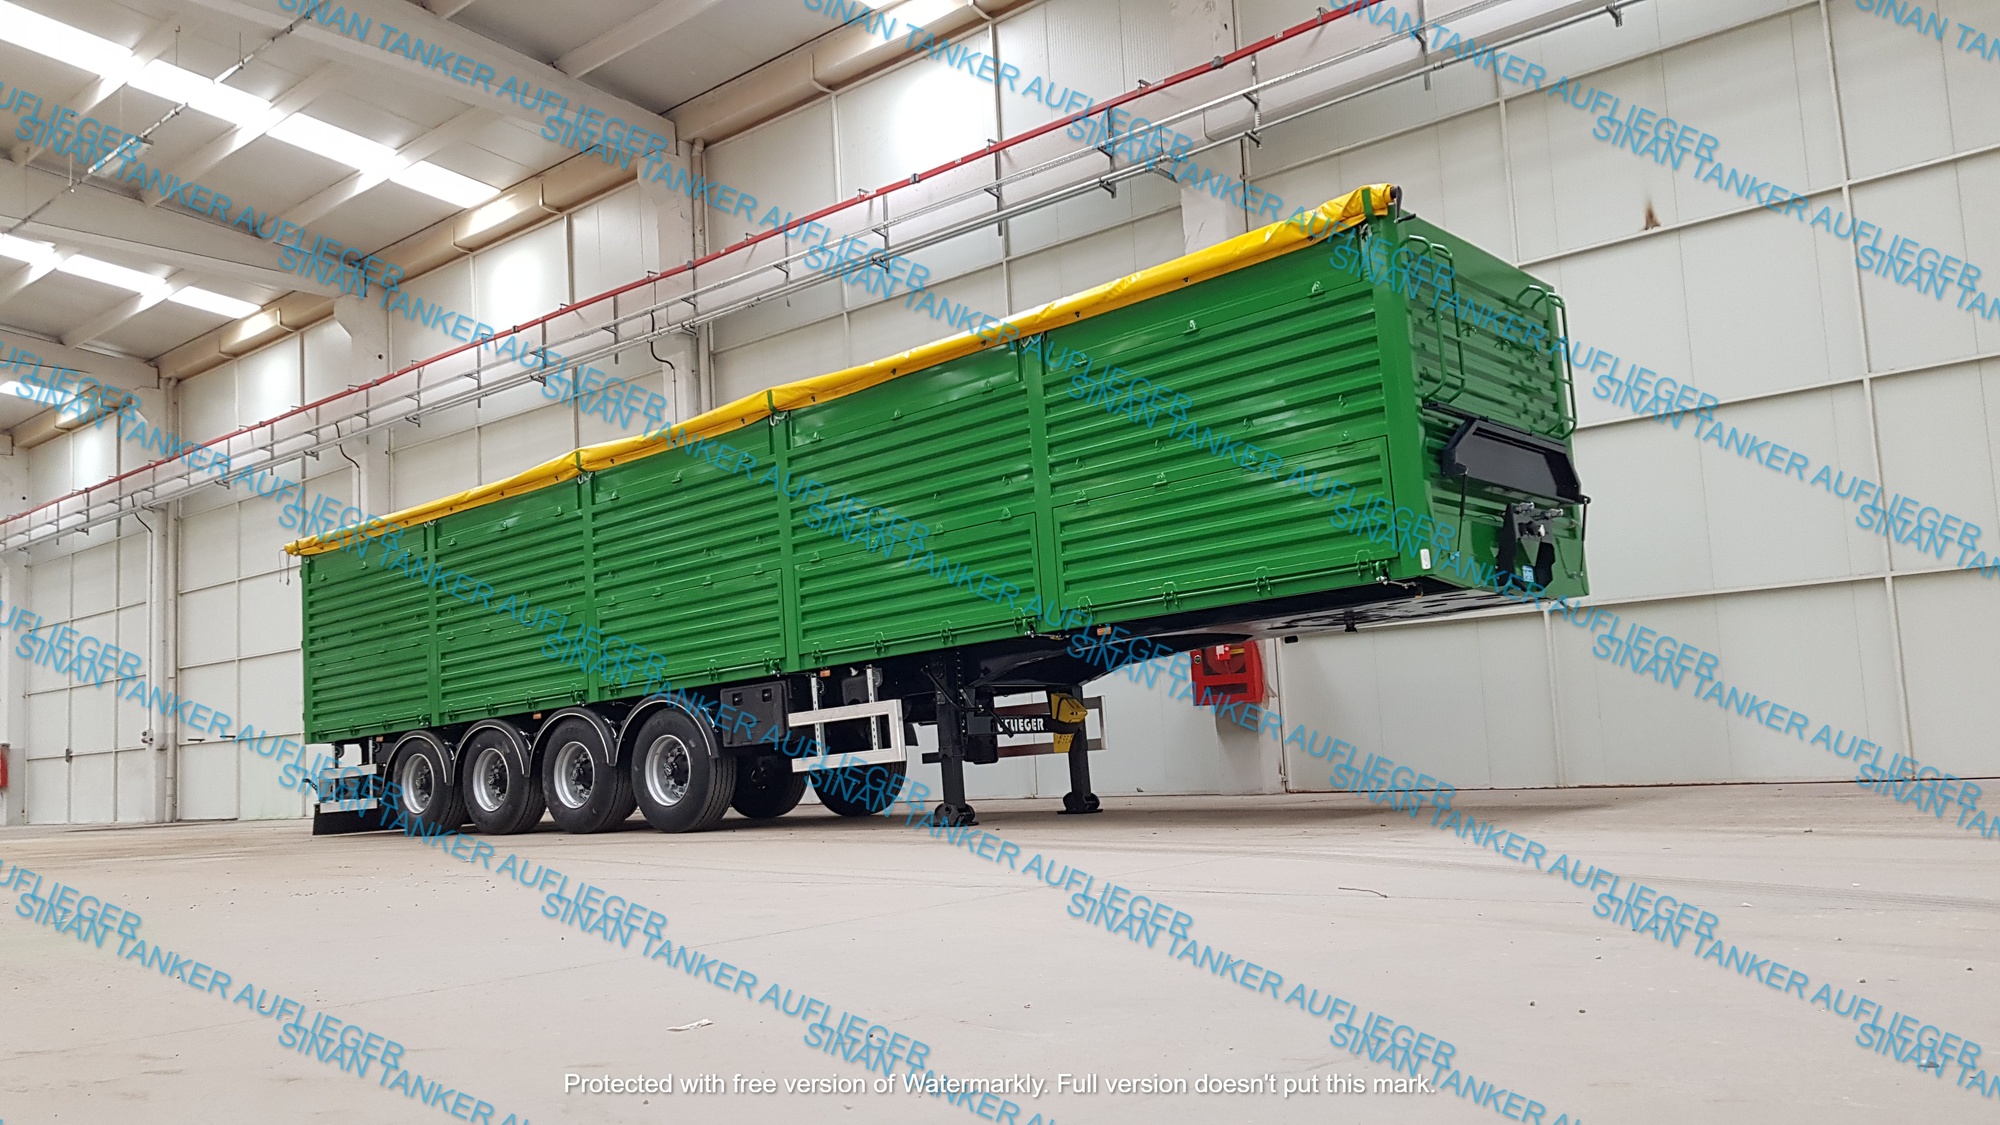 SİNANLI TANKER - TRAILER undefined: photos 9